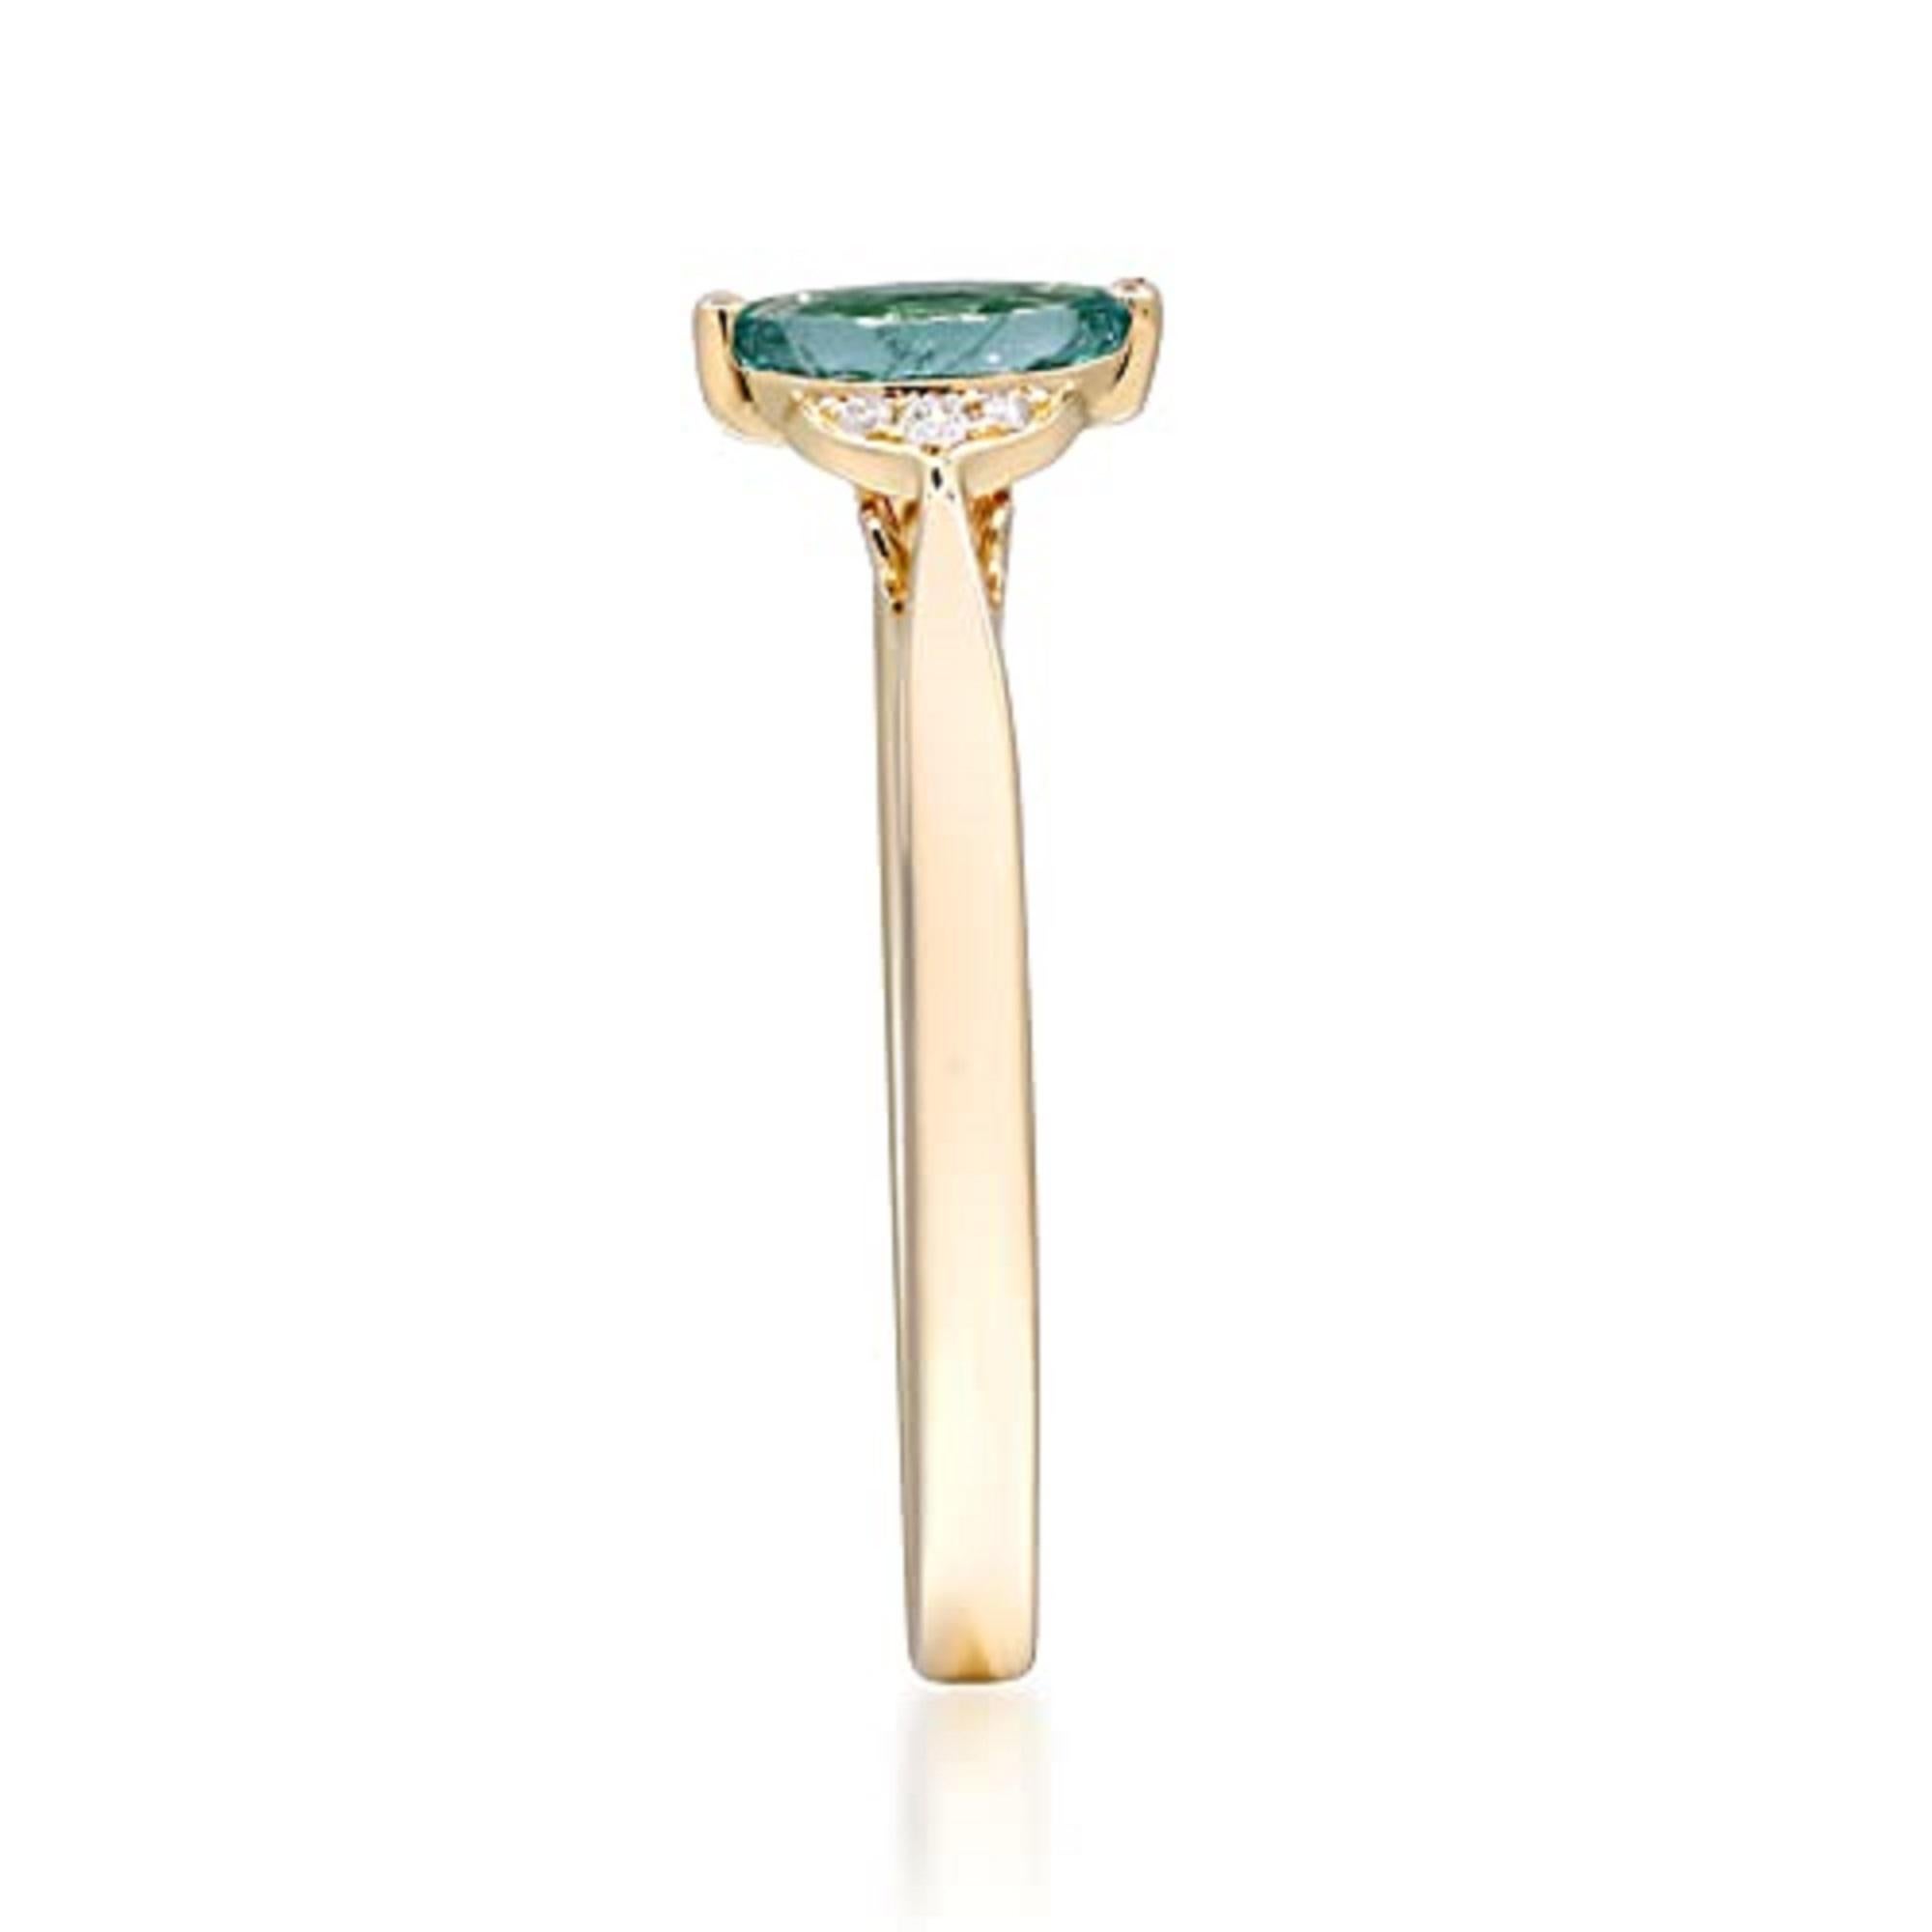 Decorate yourself in elegance with this Ring is crafted from 14-karat Yellow Gold by Gin & Grace. This Ring is made up of 7x3.5 mm Marquise-Cut Emerald (1 pcs) 0.29 carat and Round-cut White Diamond (6 Pcs) 0.04 Carat. This Ring is weight 1.41